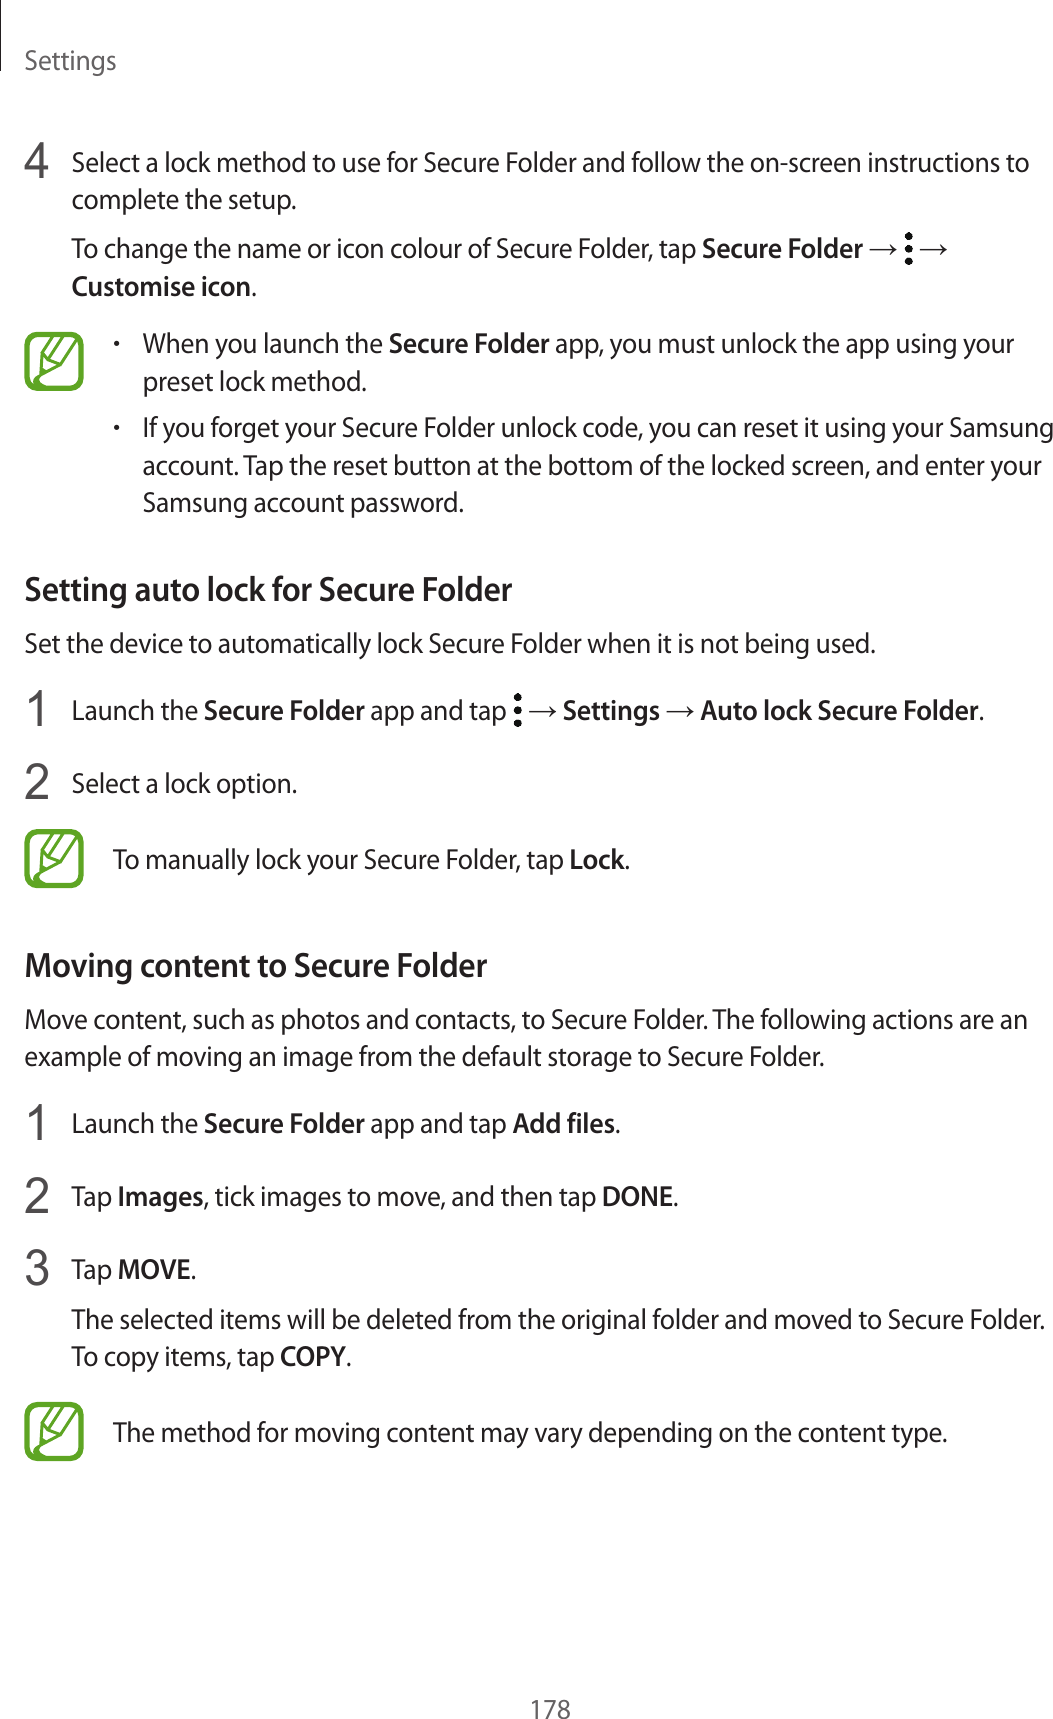 Settings1784  Select a lock method to use for Secure Folder and follow the on-screen instructions to complete the setup.To change the name or icon colour of Secure Folder, tap Secure Folder →   → Customise icon.•When you launch the Secure Folder app, you must unlock the app using your preset lock method.•If you forget your Secure Folder unlock code, you can reset it using your Samsung account. Tap the reset button at the bottom of the locked screen, and enter your Samsung account password.Setting auto lock for Secure FolderSet the device to automatically lock Secure Folder when it is not being used.1  Launch the Secure Folder app and tap   → Settings → Auto lock Secure Folder.2  Select a lock option.To manually lock your Secure Folder, tap Lock.Moving content to Secure FolderMove content, such as photos and contacts, to Secure Folder. The following actions are an example of moving an image from the default storage to Secure Folder.1  Launch the Secure Folder app and tap Add files.2  Tap Images, tick images to move, and then tap DONE.3  Tap MOVE.The selected items will be deleted from the original folder and moved to Secure Folder. To copy items, tap COPY.The method for moving content may vary depending on the content type.